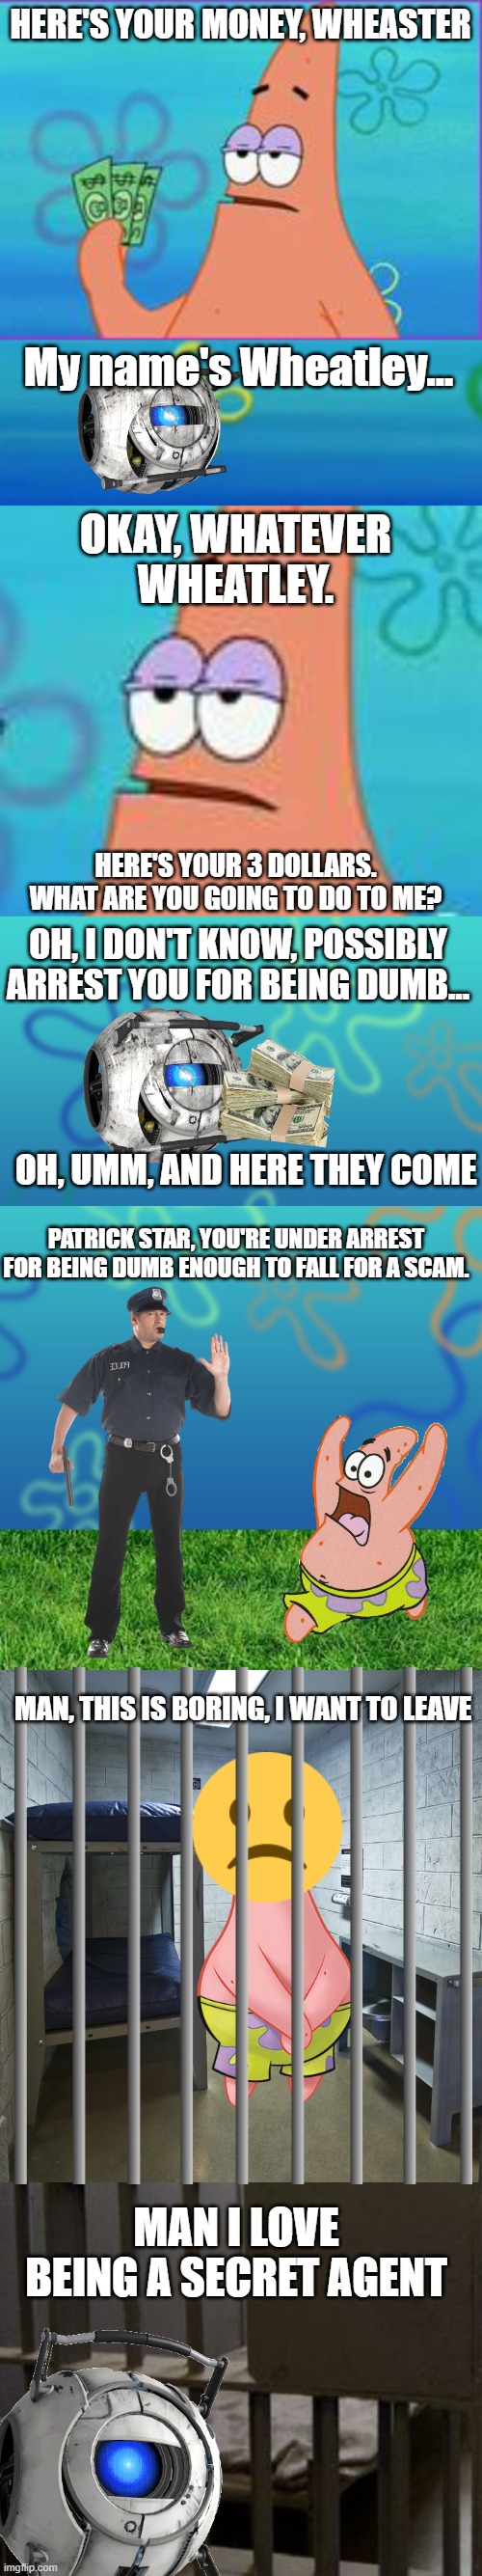 A meme for Team Wheatley (I don't know) | HERE'S YOUR MONEY, WHEASTER; My name's Wheatley... OKAY, WHATEVER WHEATLEY. HERE'S YOUR 3 DOLLARS. WHAT ARE YOU GOING TO DO TO ME? OH, I DON'T KNOW, POSSIBLY ARREST YOU FOR BEING DUMB... OH, UMM, AND HERE THEY COME; PATRICK STAR, YOU'RE UNDER ARREST FOR BEING DUMB ENOUGH TO FALL FOR A SCAM. MAN, THIS IS BORING, I WANT TO LEAVE; MAN I LOVE BEING A SECRET AGENT | image tagged in patrick star,story,police | made w/ Imgflip meme maker